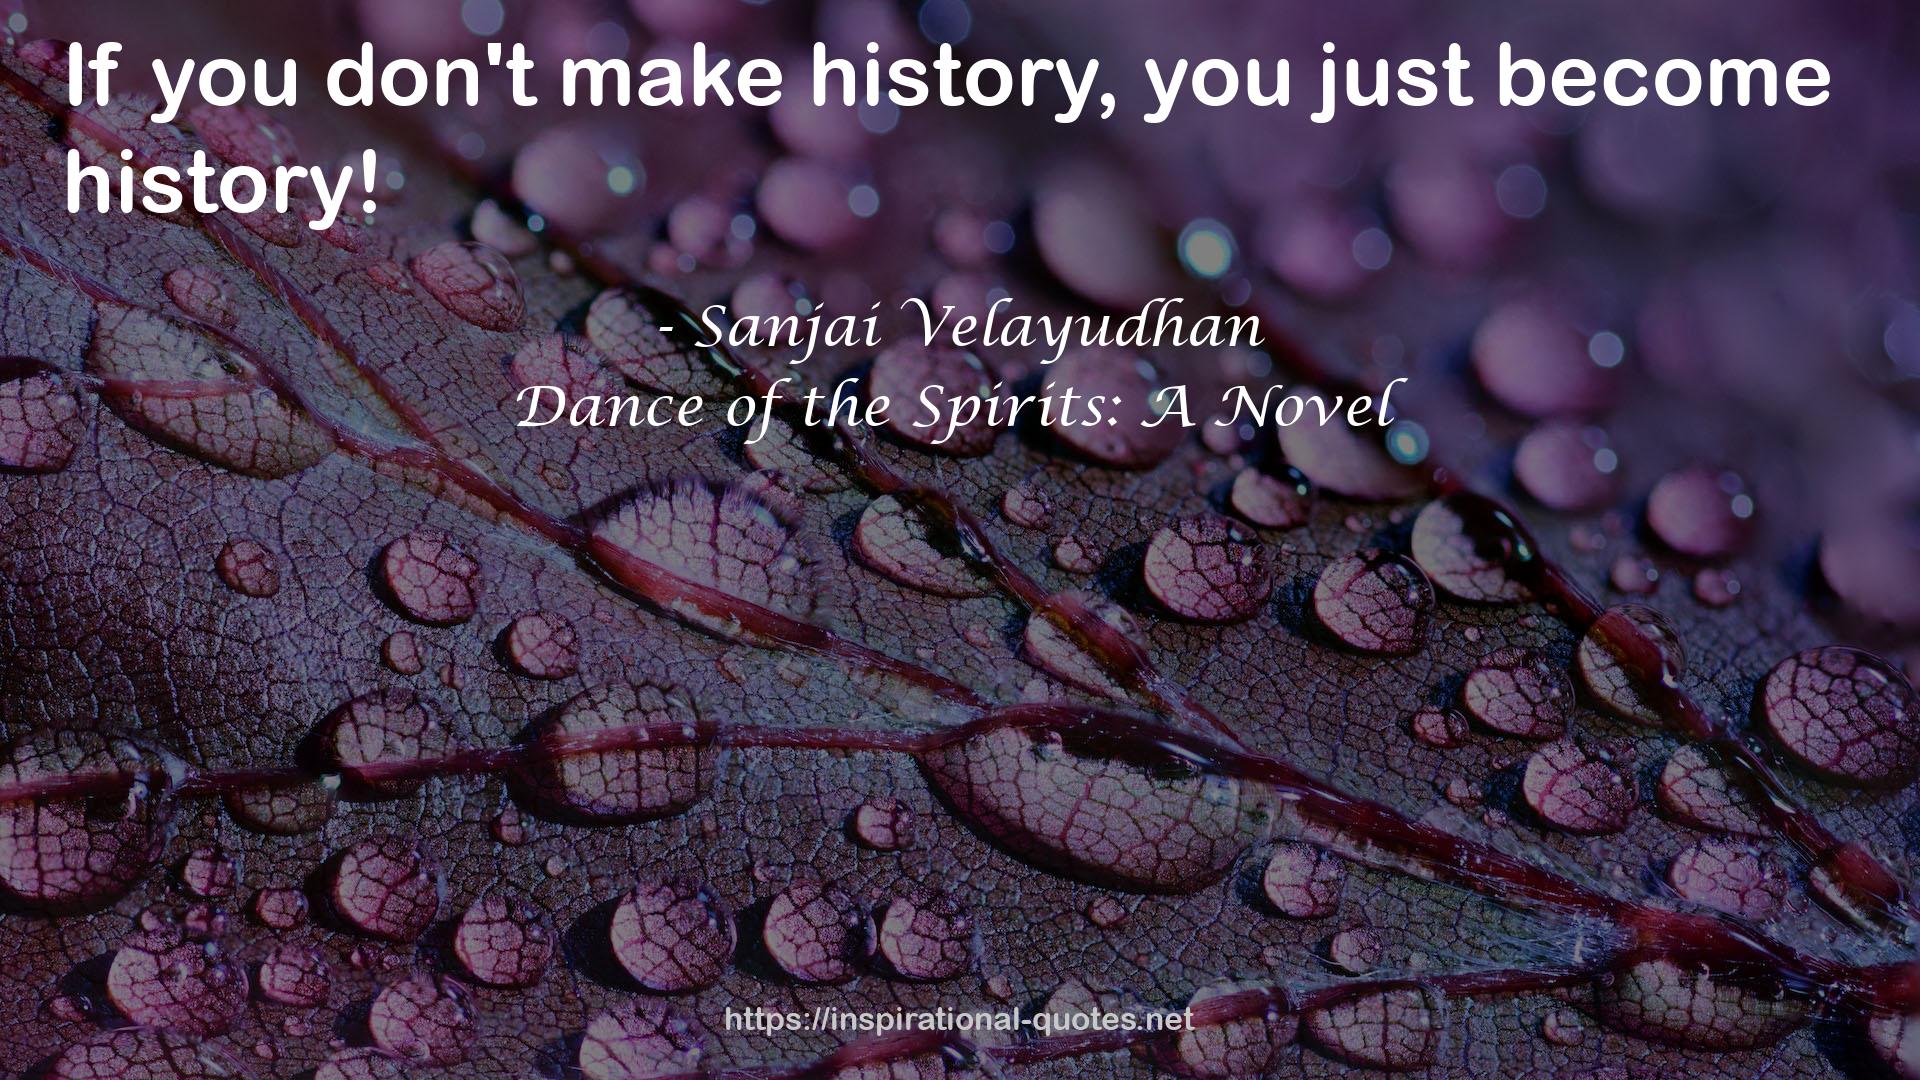 Dance of the Spirits: A Novel QUOTES